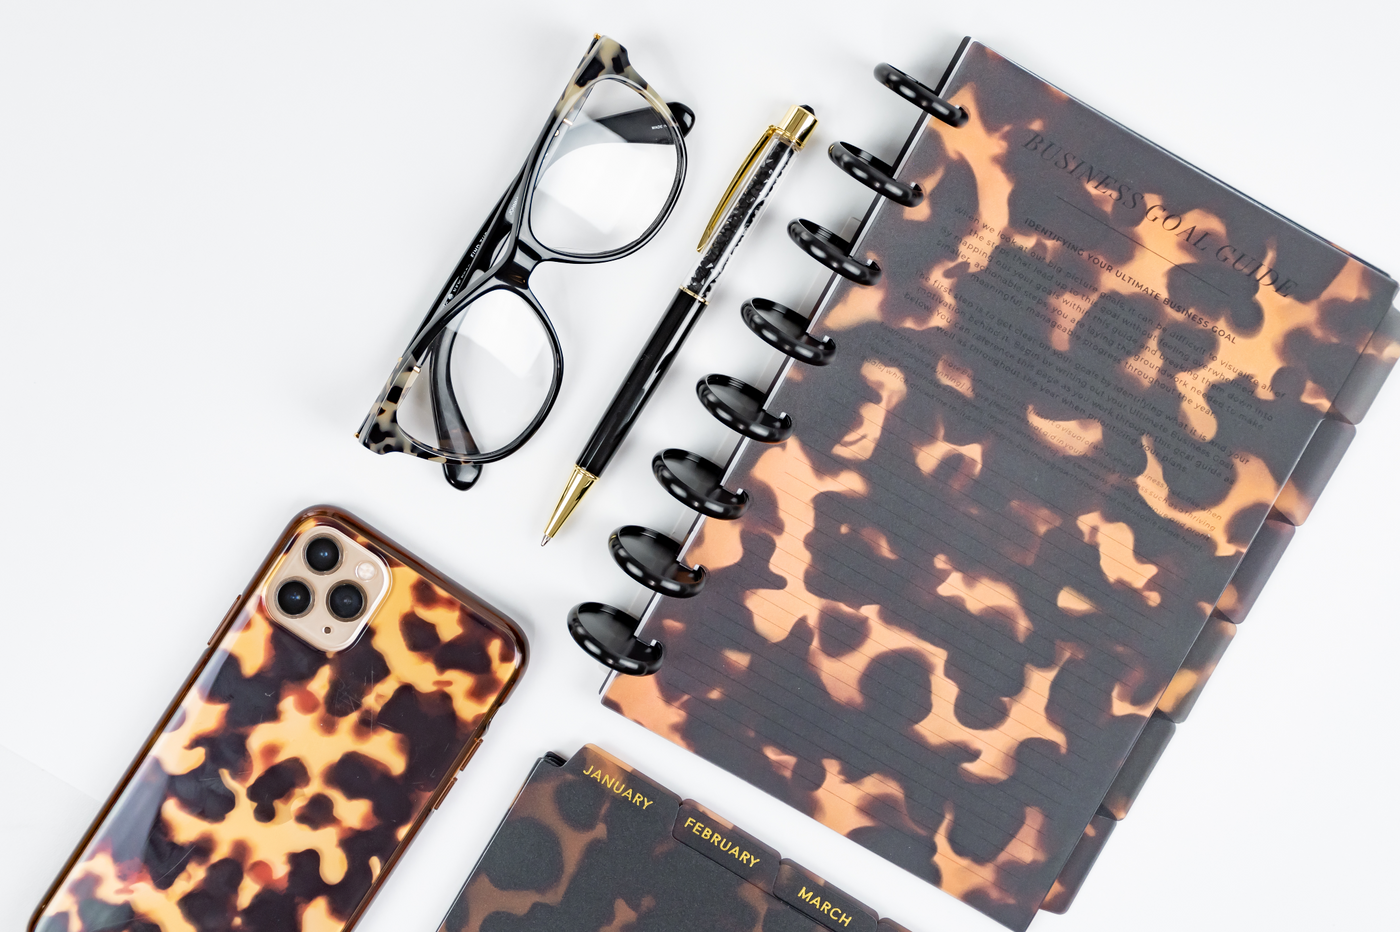 Tortoiseshell planner accessories,  featuring Hardcovers, monthly dividers, Pengem